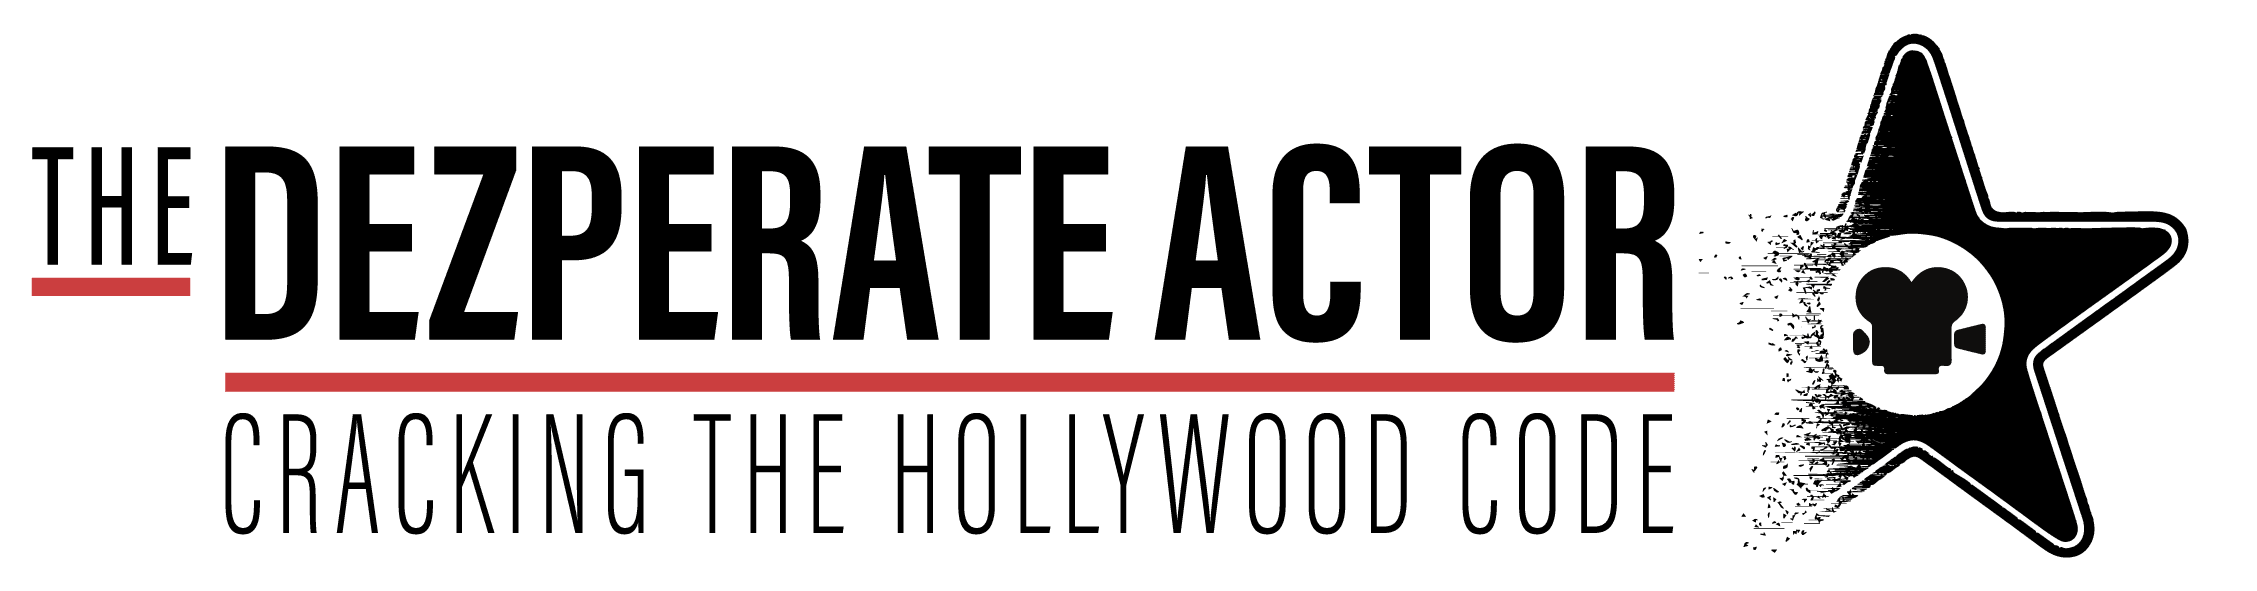 Dezperate Actor - Cracking The Hollywood Code